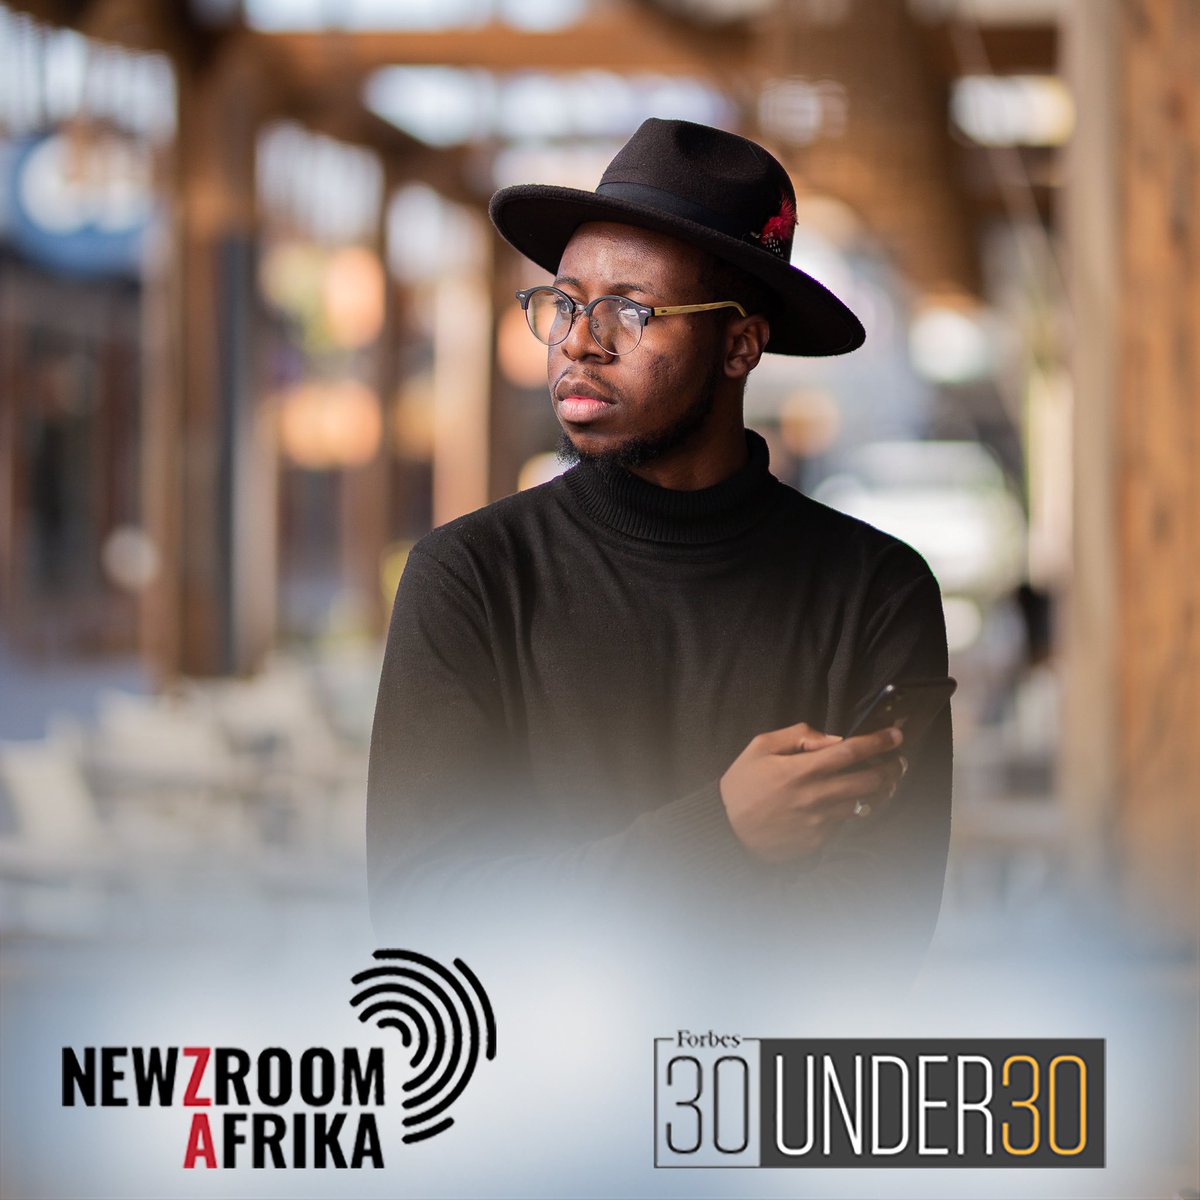 Tune into @Newzroom405 Dstv Channel 405 today at 1pm, I’m on @405Business_ with @aycawe speaking about the entrepreneurial journey, @cmindspace and @forbesafrica #30Under30 #MamaImadeItFridayShow #BusinessUnusual